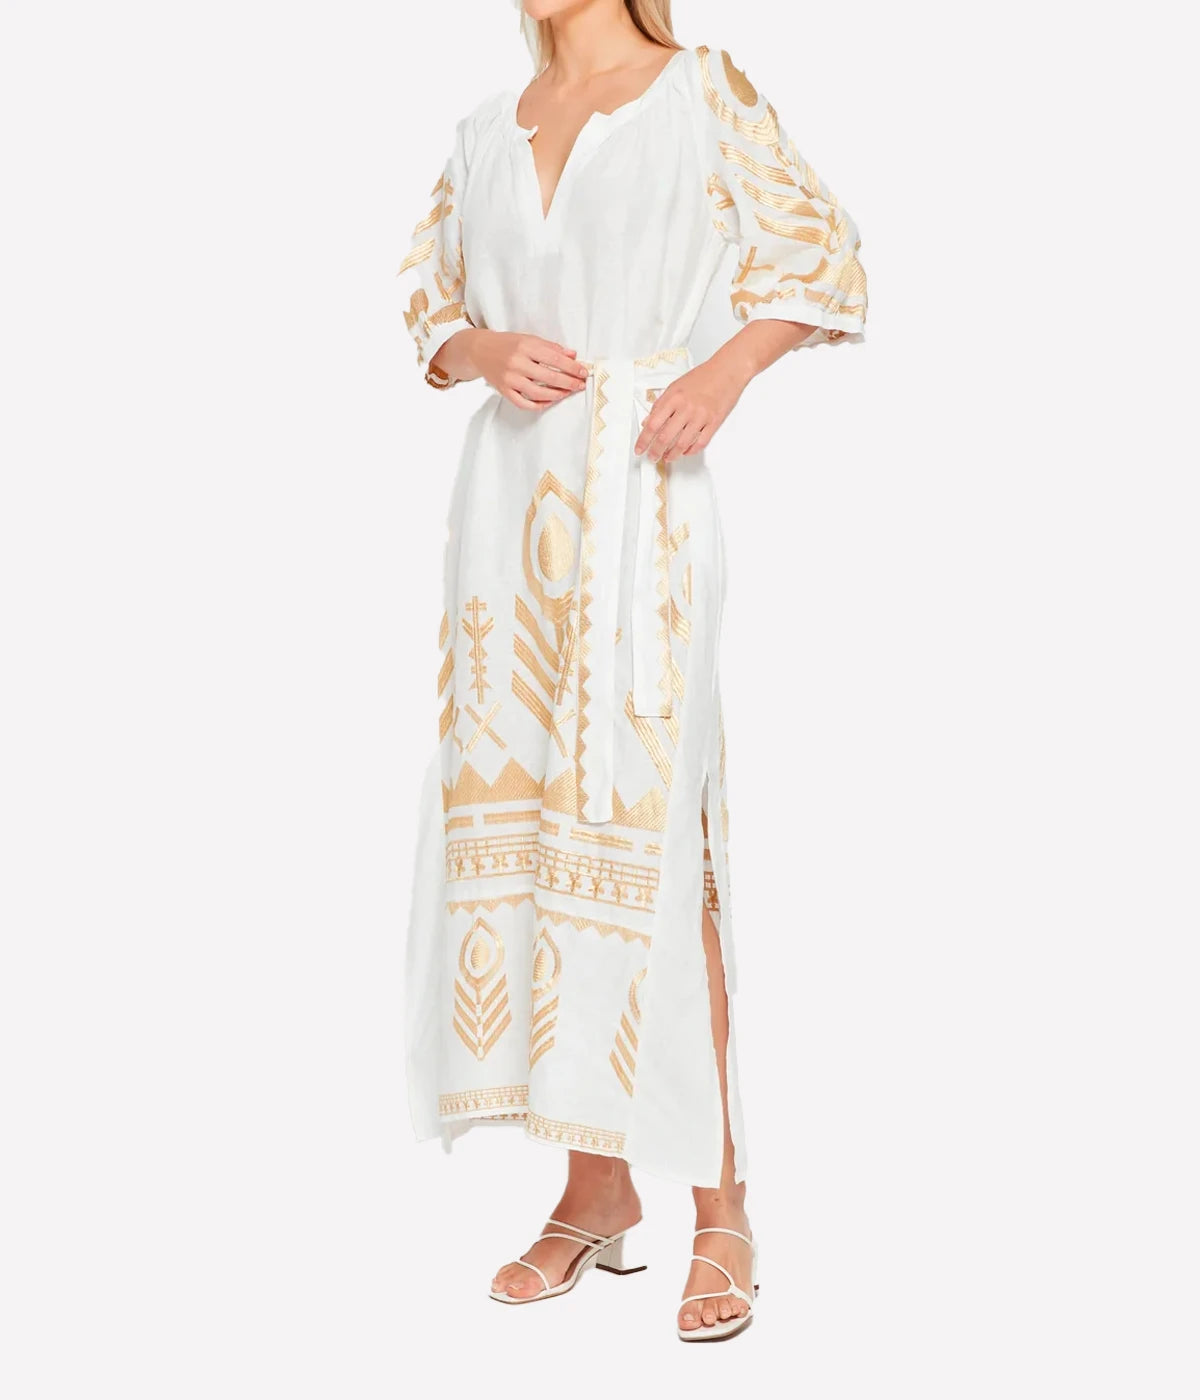 Long Feather Dress in White & Gold